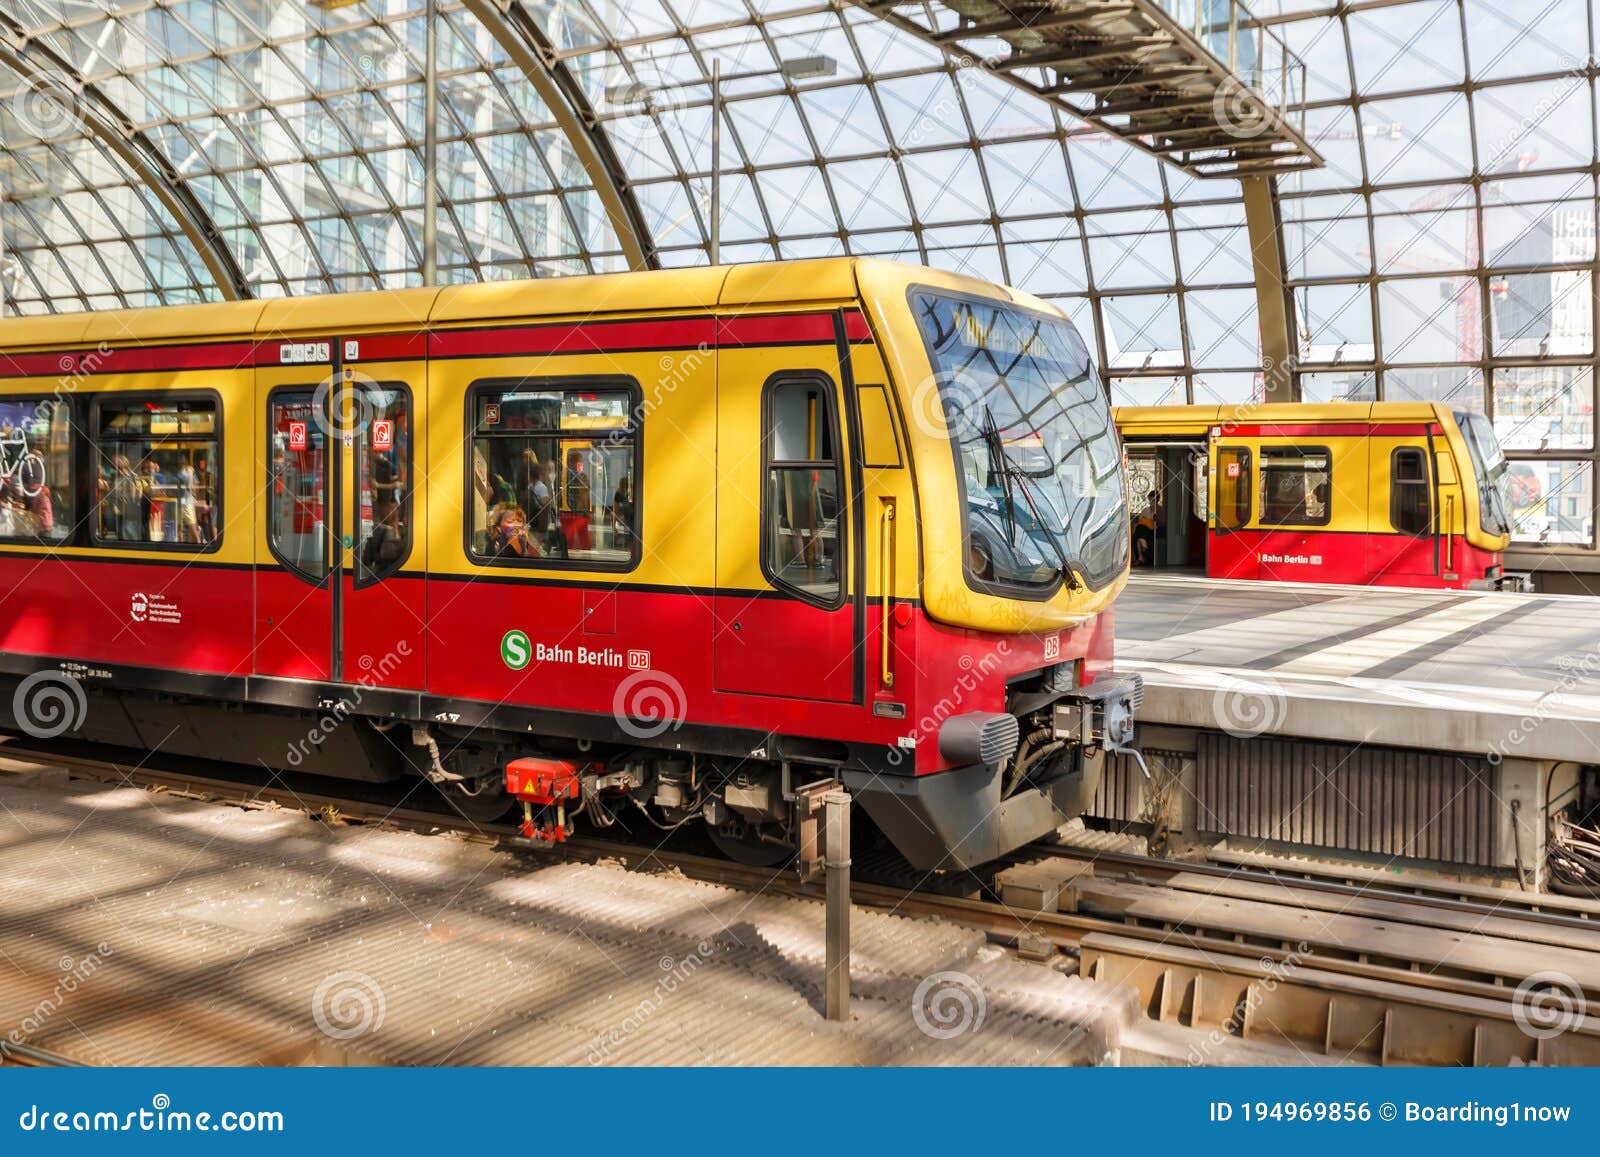 5 Problems Everyone Has With s-bahn berlin – How To Solved Them